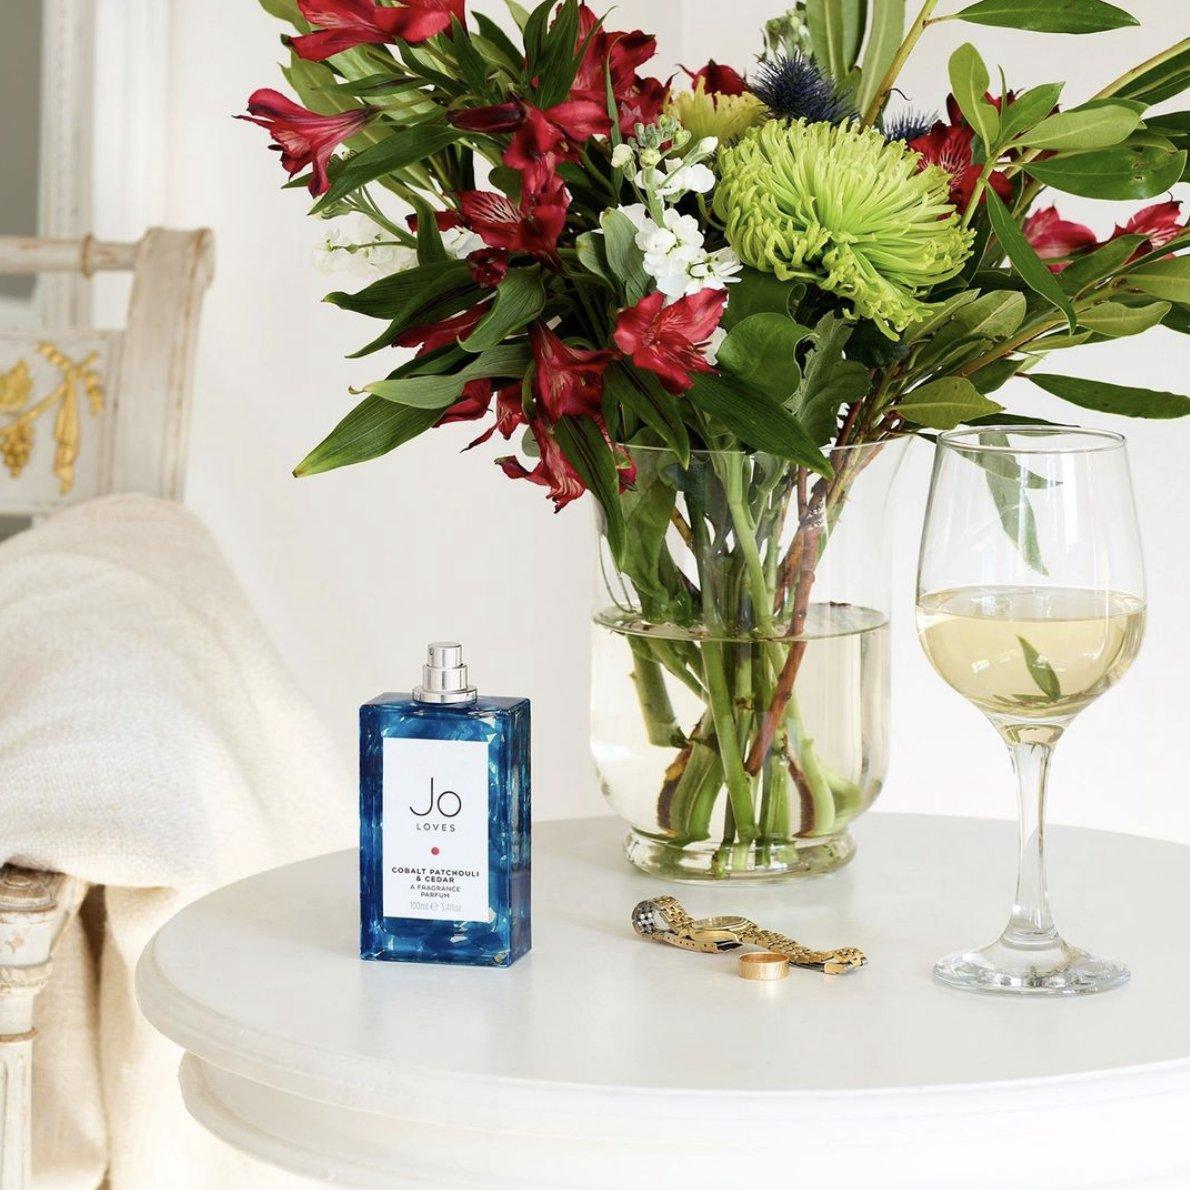 Blue rectangular Jo Loves Cobalt Patchouli & Cedar fragrance bottle on a white bedside table next to a vase of red and white flowers, a gold watch and a glass of white wine